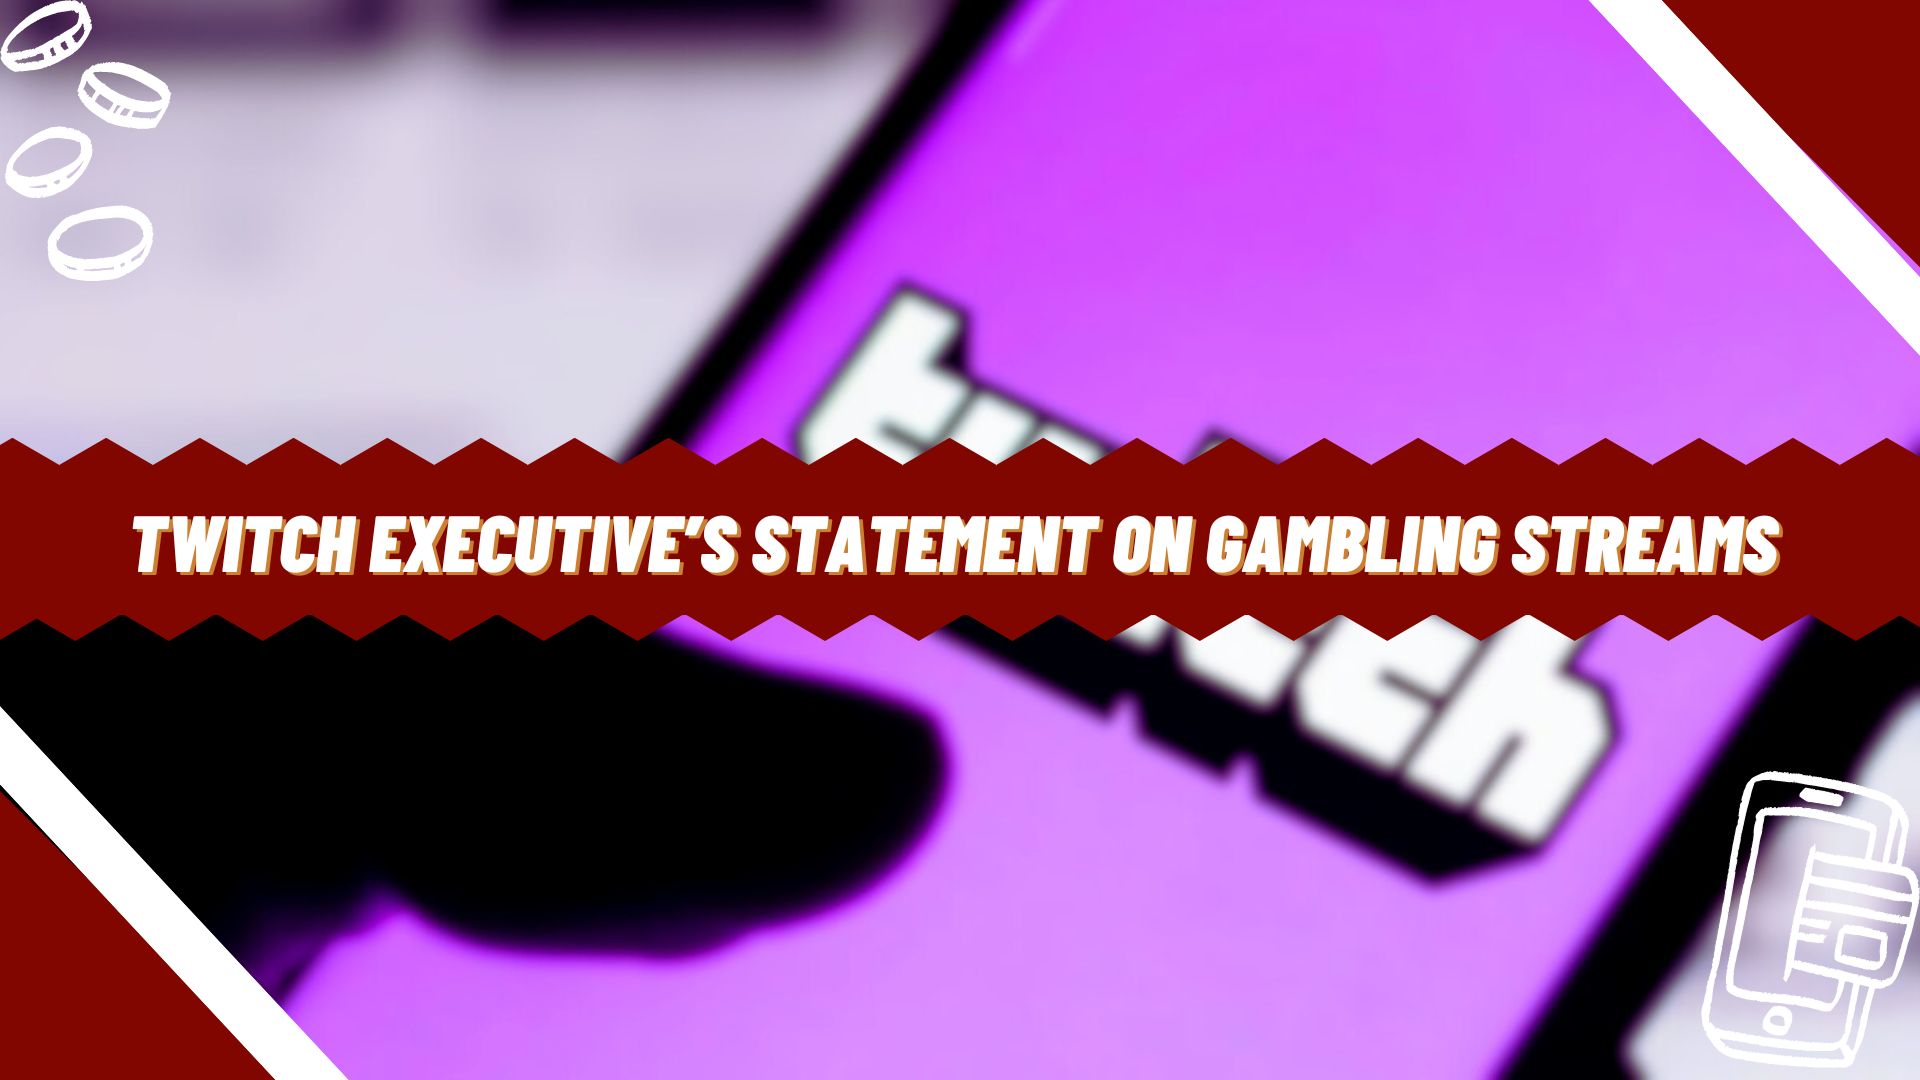 Twitch Executive’s Statement on Gambling Streams 